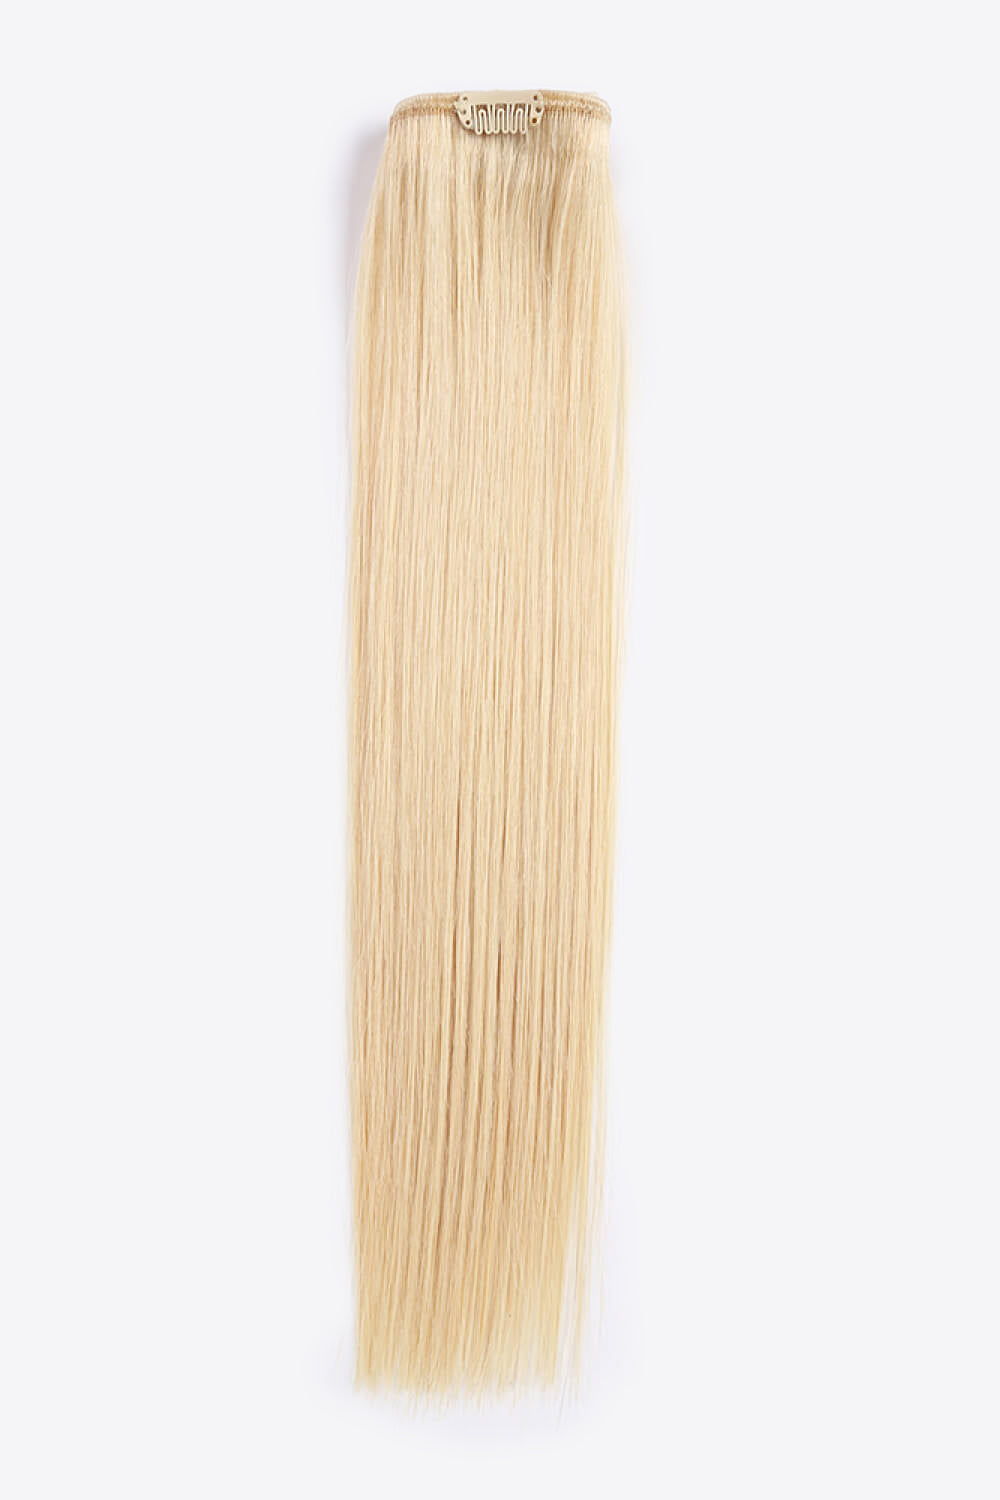 Blonde 16" 110g Clip-in Hair Extensions Indian Human Hair